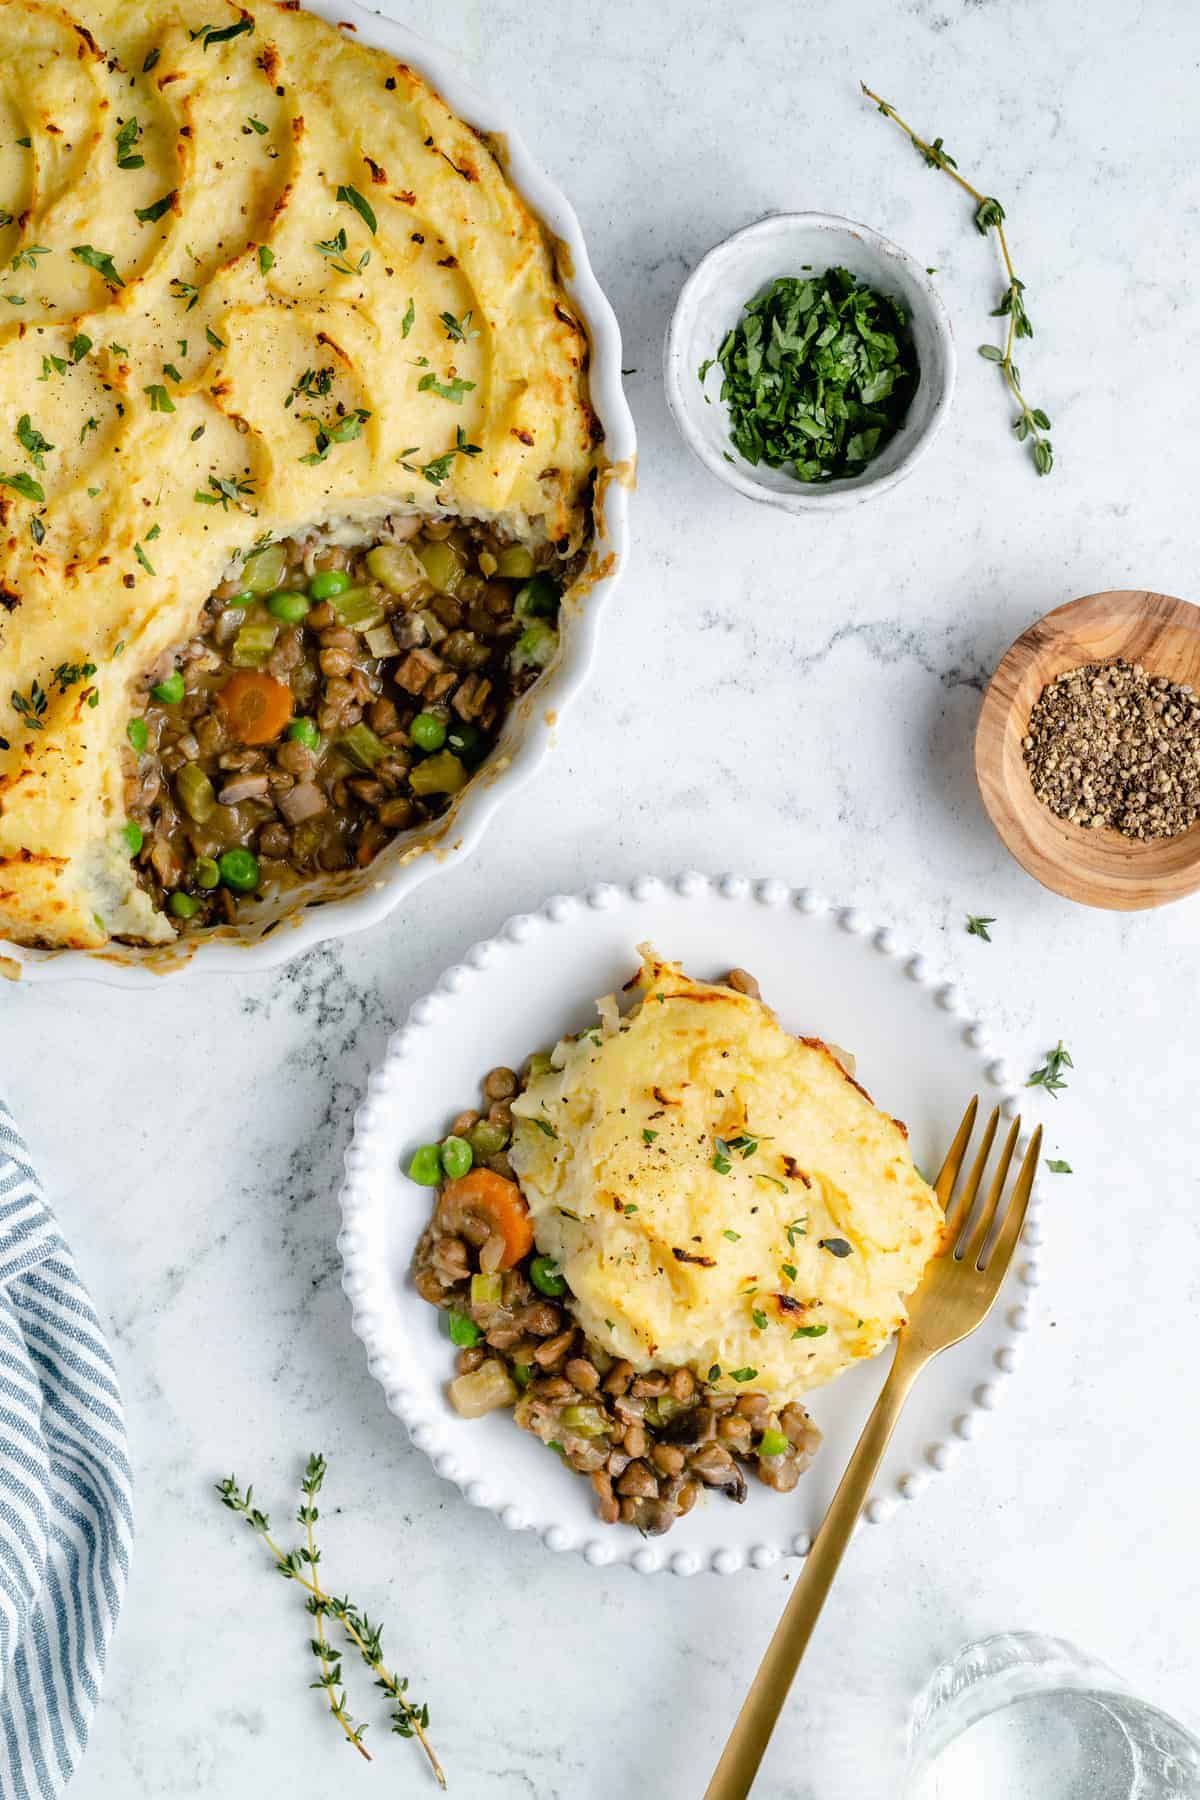 Vegan Shepherd's Pie in dish with one serving removed and plated